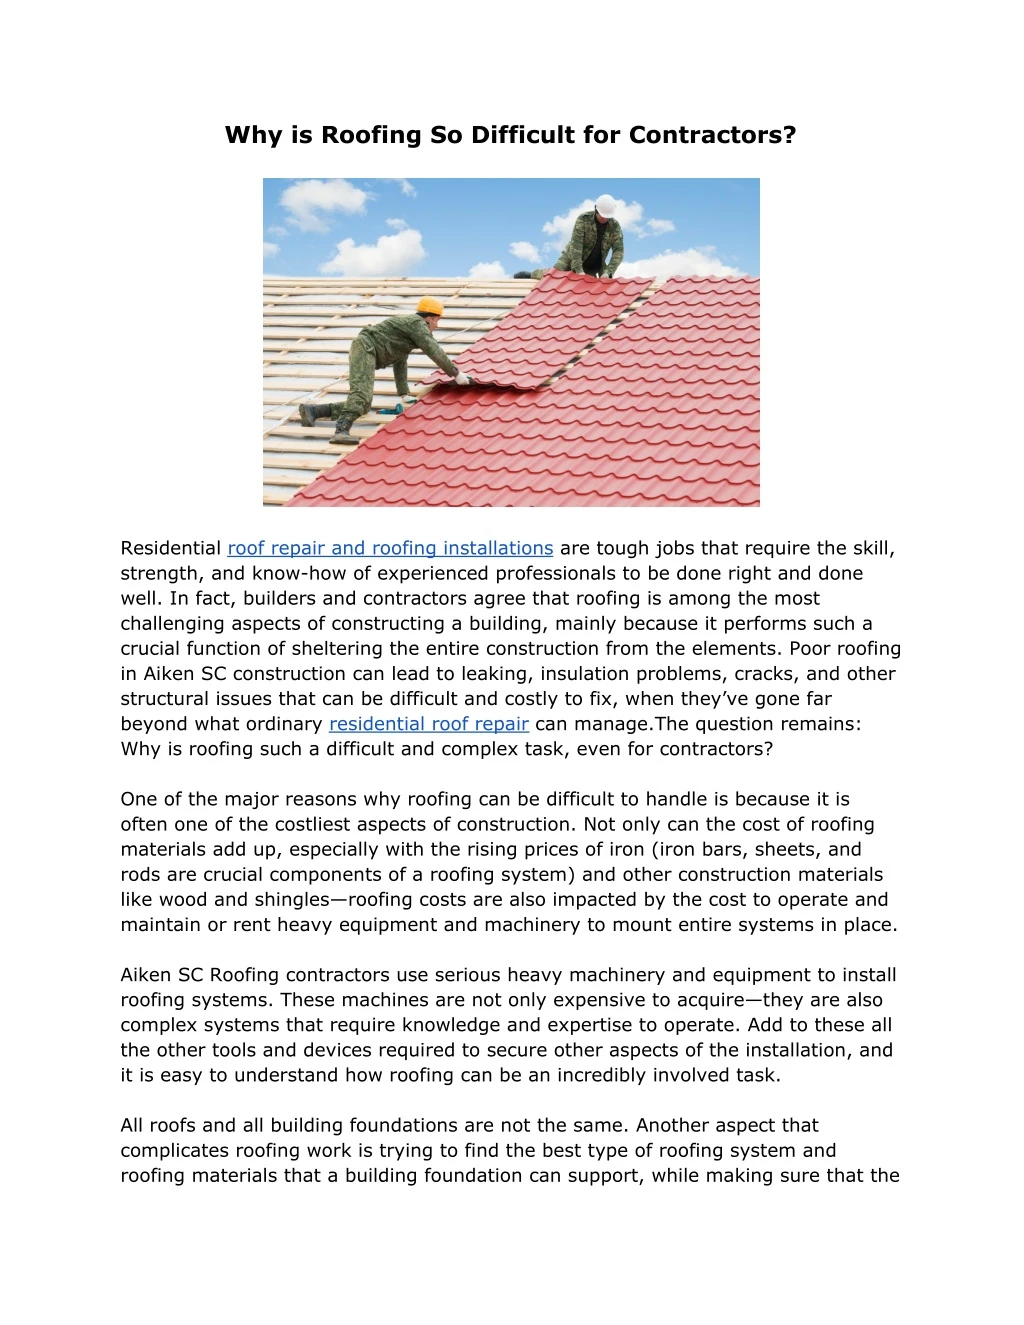 why is roofing so difficult for contractors